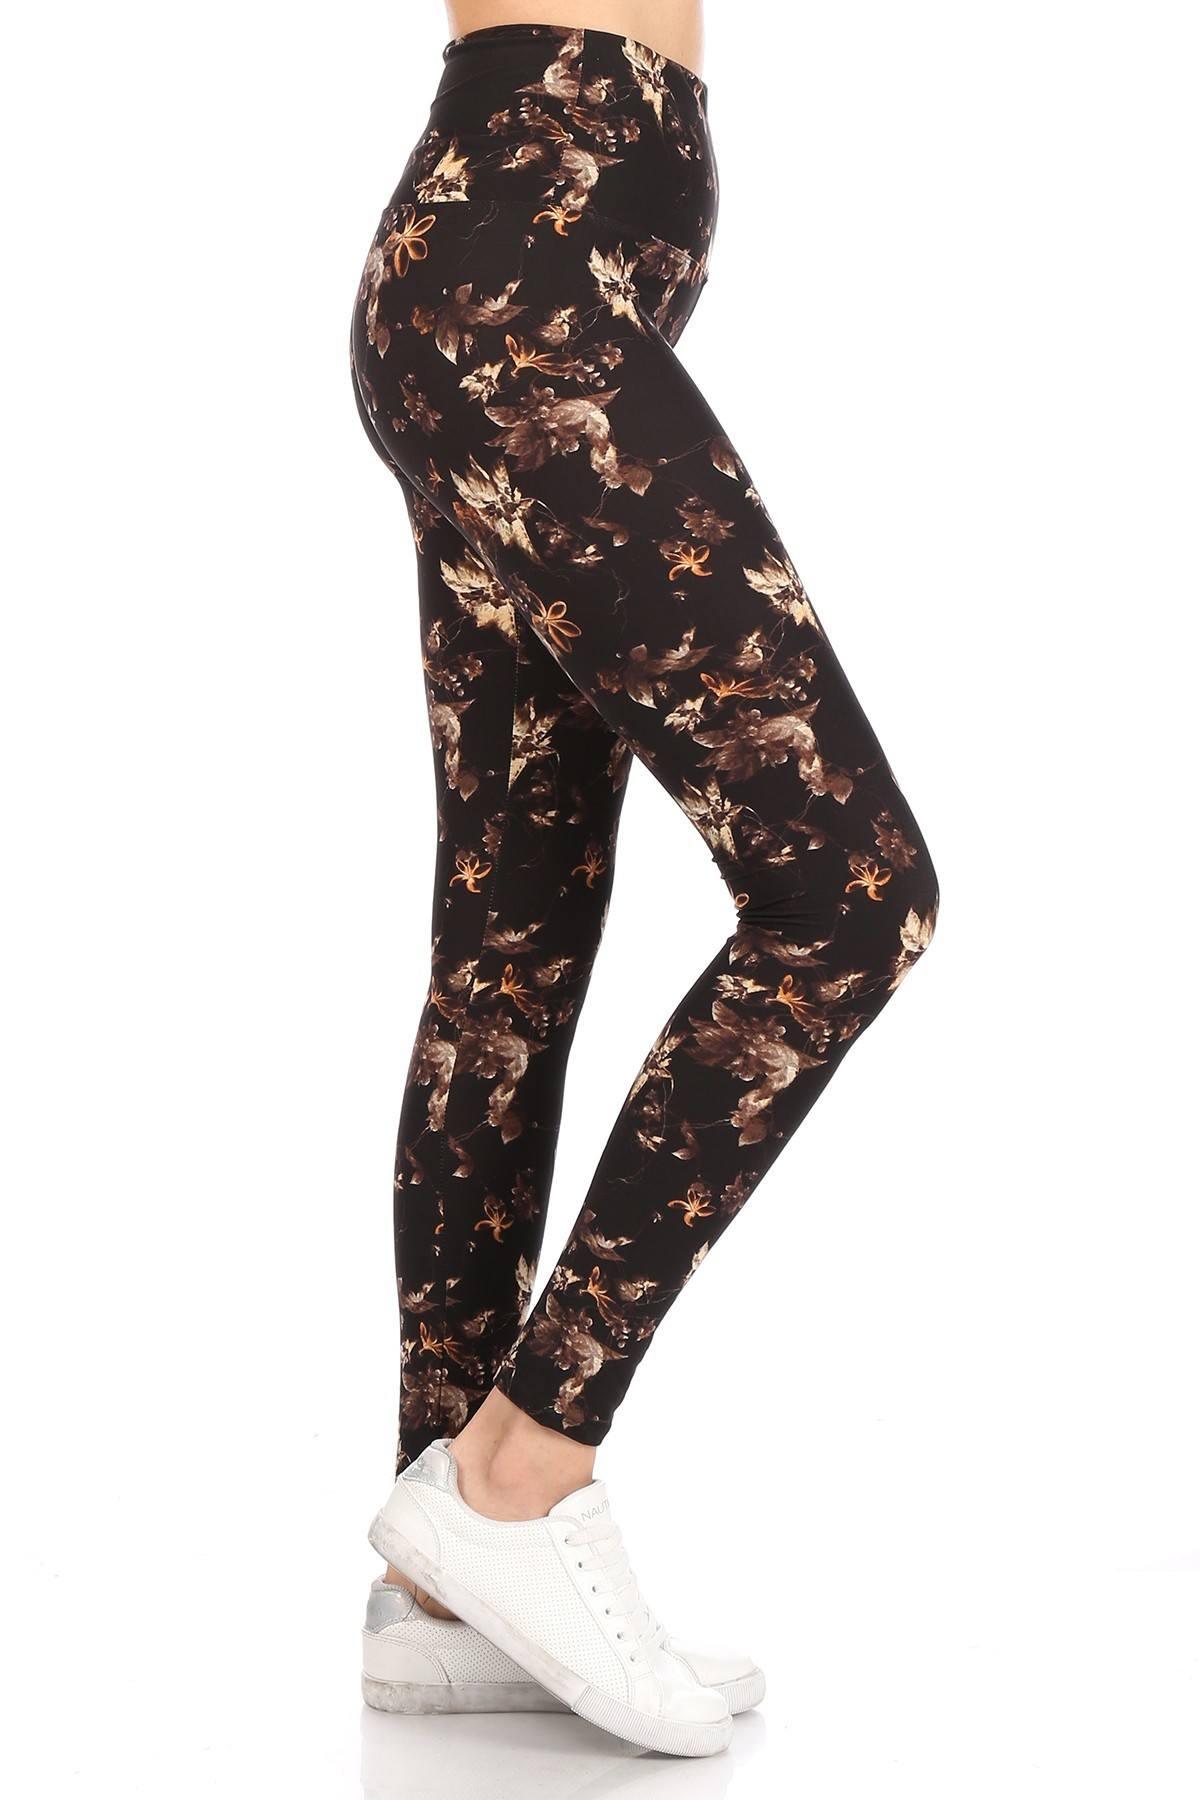 5-inch Long Yoga Style Banded Lined Multi Printed Knit Legging With High Waist Naughty Smile Fashion